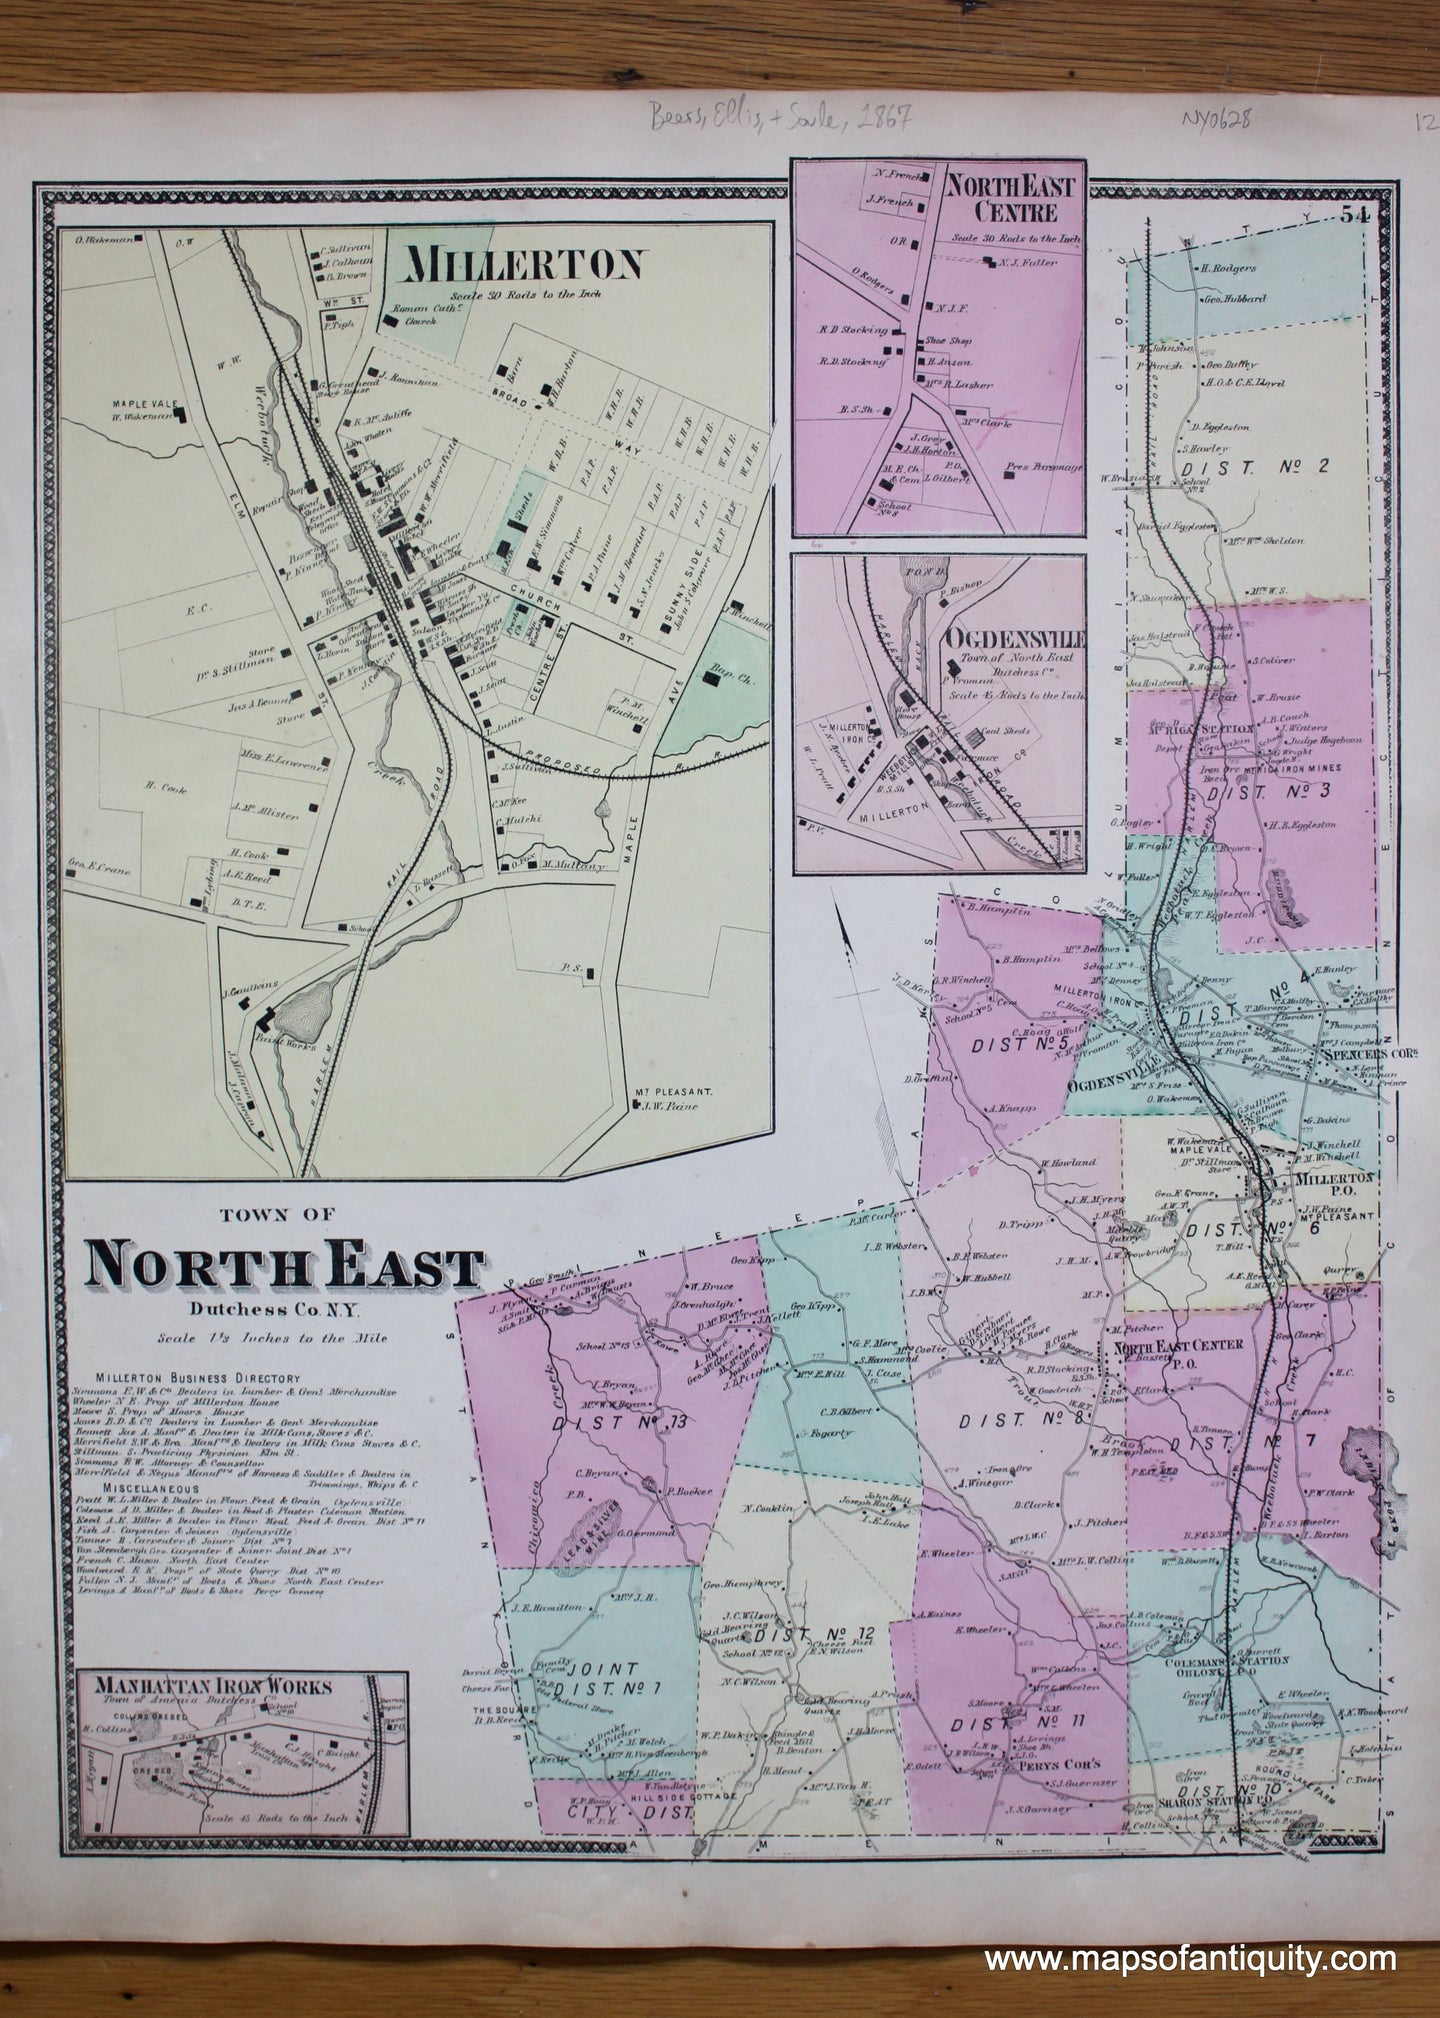 Antique-Hand-Colored-Map-Town-of-North-East-(NY)-United-States-New-York-1867-Beers-Ellis-and-Soule-Maps-Of-Antiquity